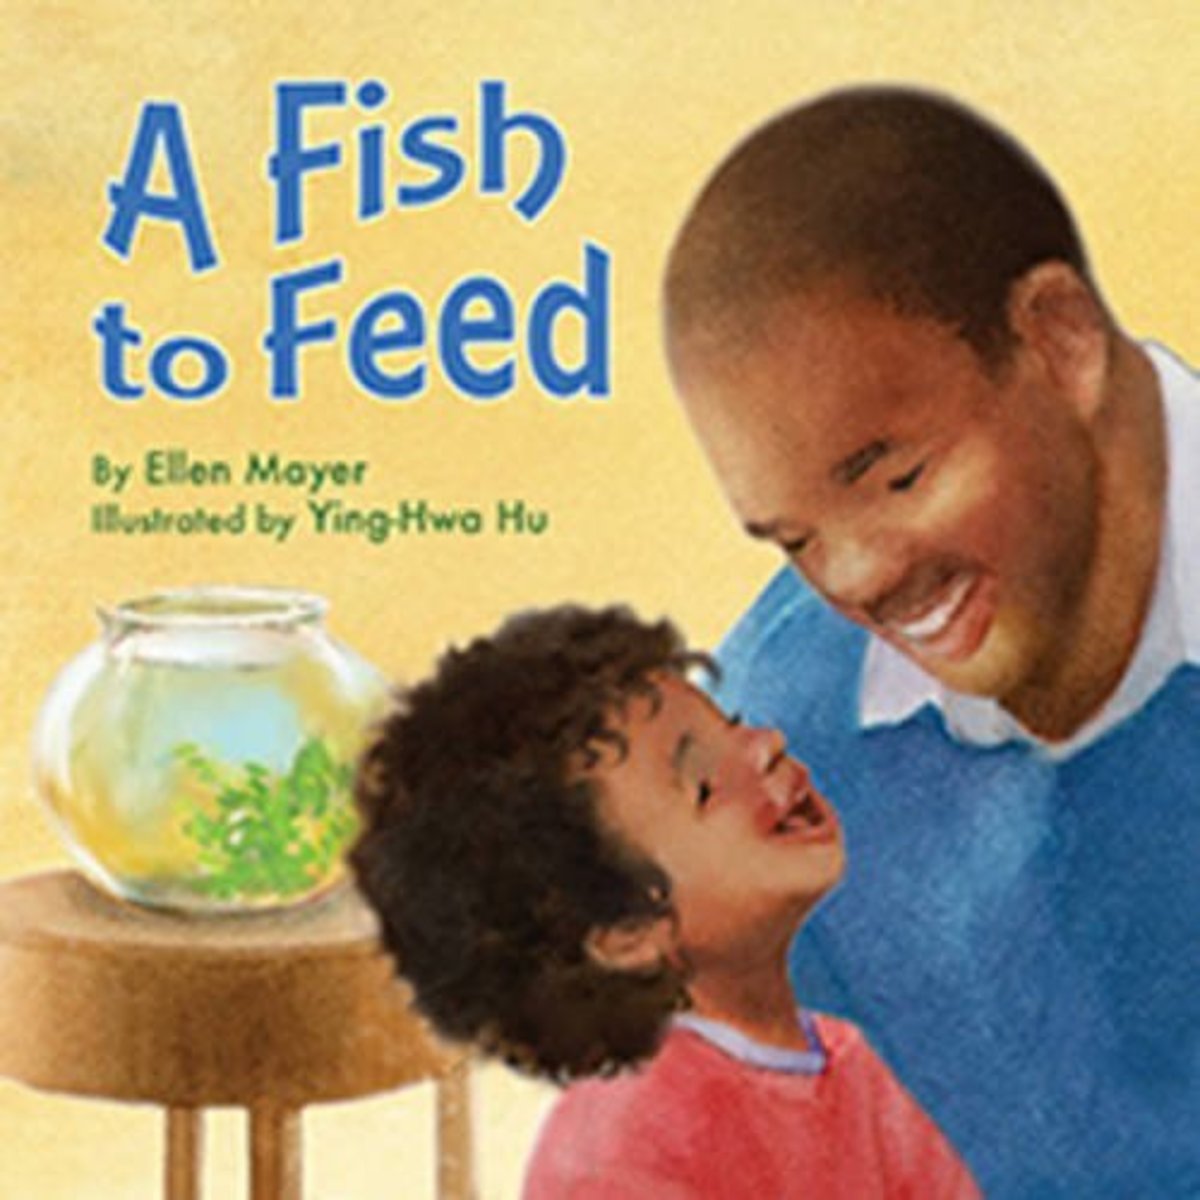 A Fish to Feed by Ellen Mayer